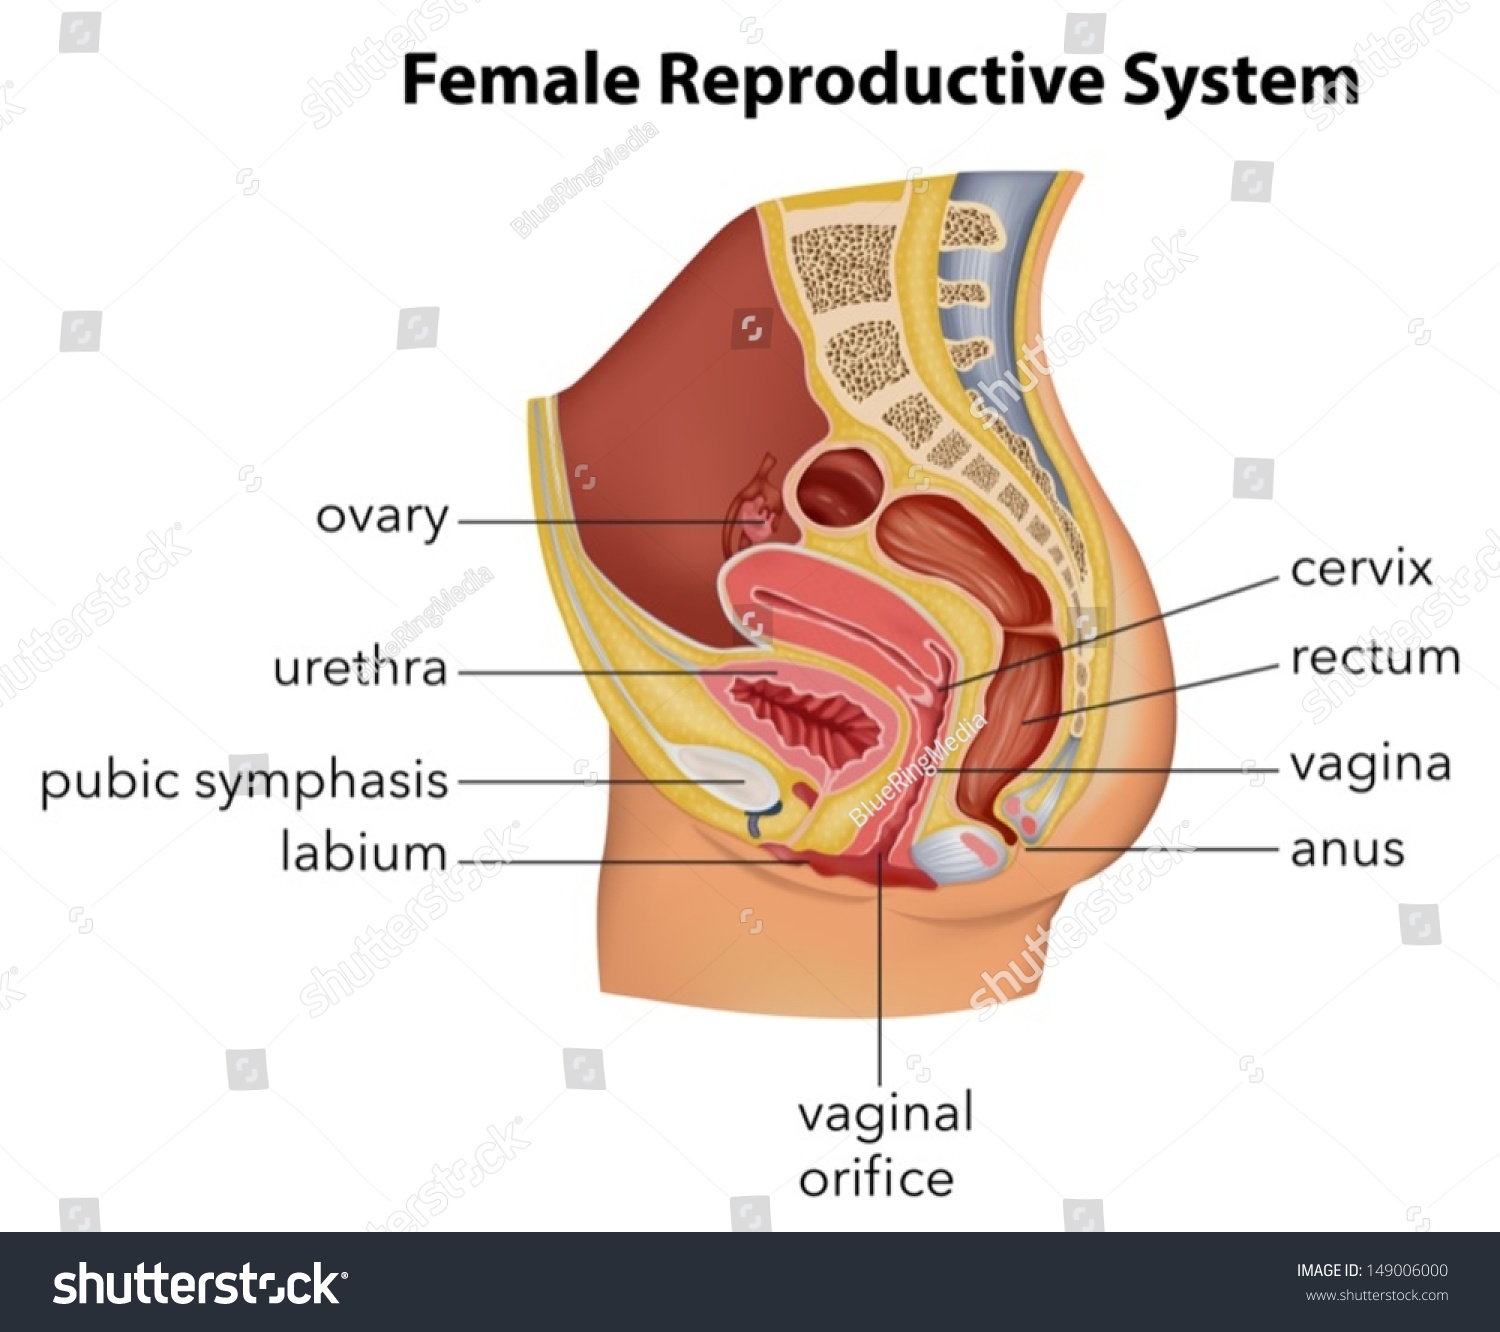 Illustration Showing Female Reproductive System Stock Vector 149006000 Shutterstock 5534